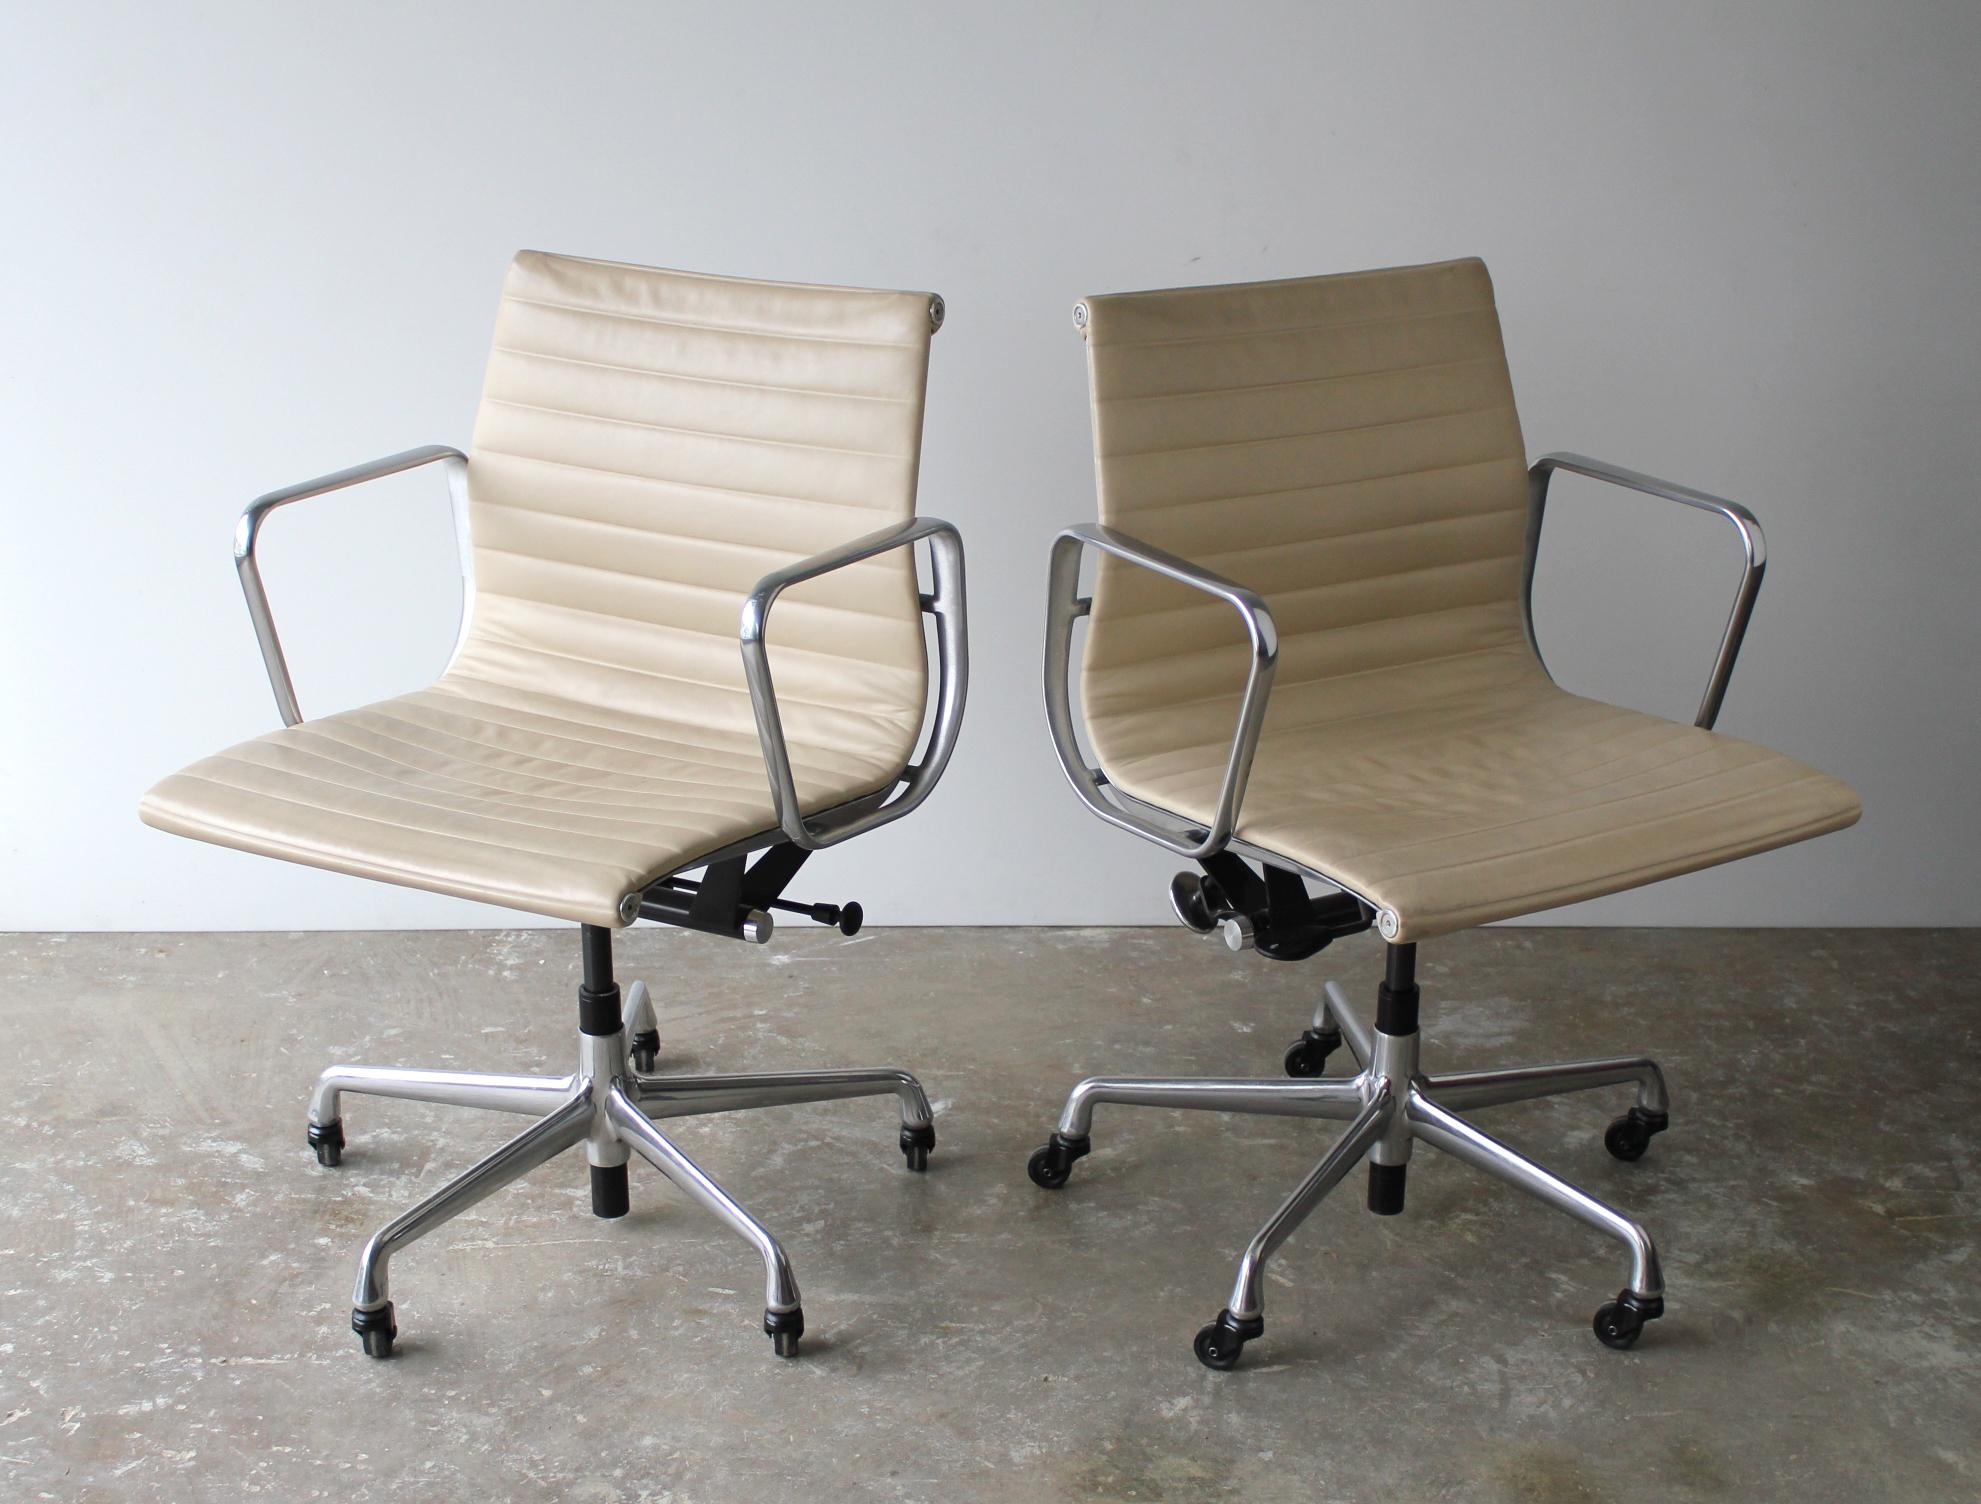 20th Century Eames Chairs for Herman Miller Aluminum Group Management Series, 10 Available